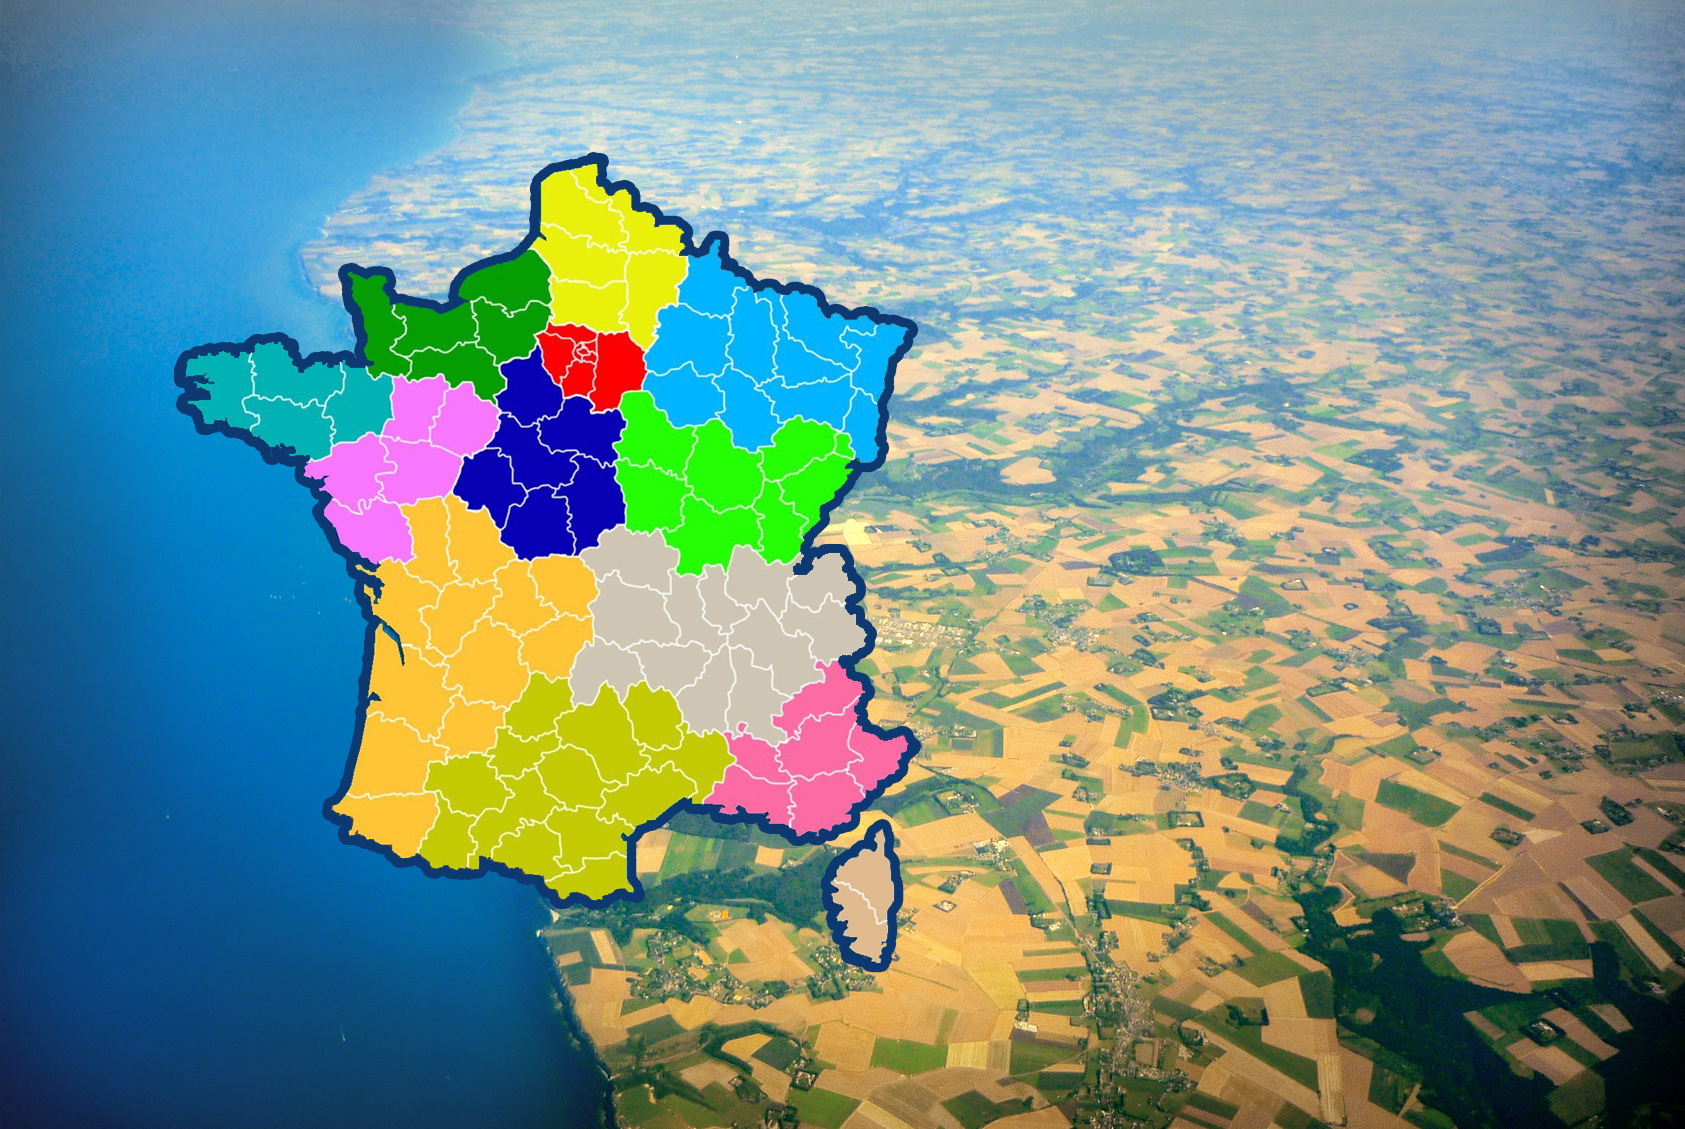 Category:Maps of Lens (France) - Wikimedia Commons